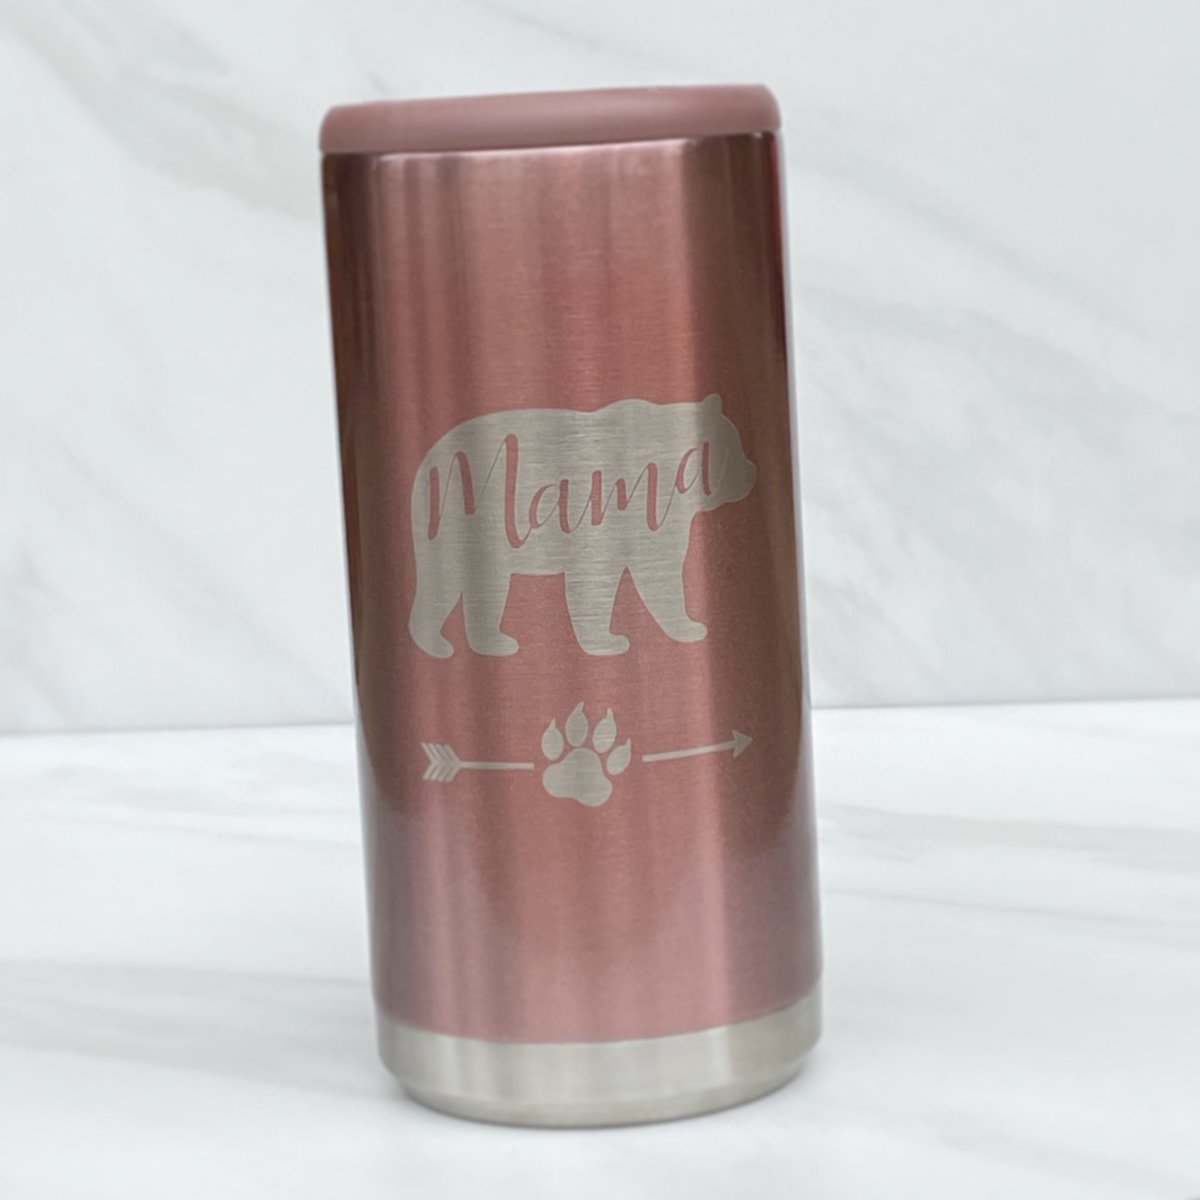 Hey there MAMA 🐻 BEAR

bear cubs & names can also be added 💕

#engraveme #personalizedgifts #giftsforher #mamabear #customtumblers #skinnycancooler #momlife #mom #love #family #christmasgifts #stockingstuffers #shoplocal